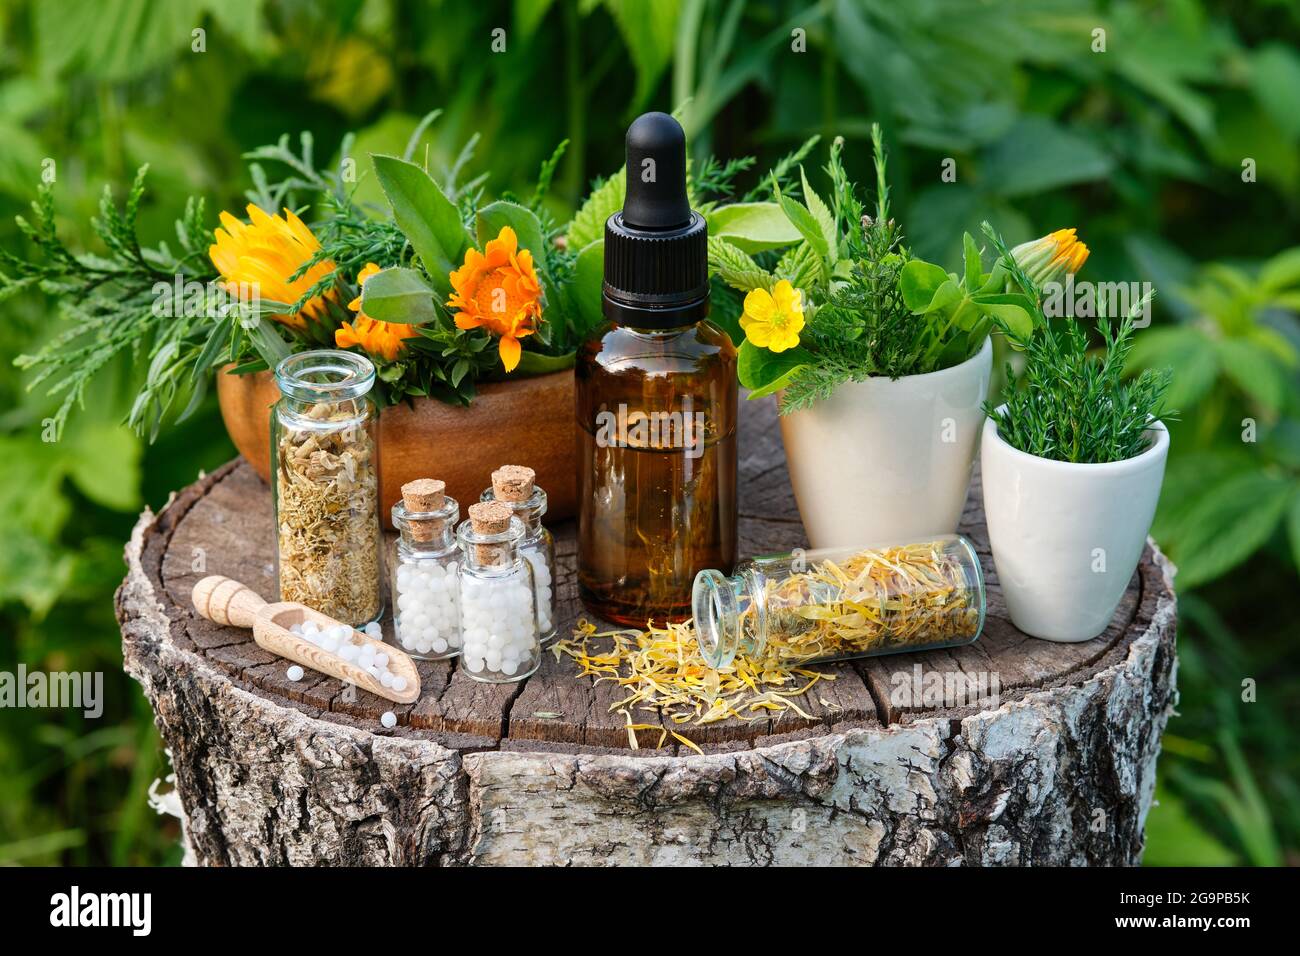 Bottles of homeopathy granules. Dropper bottle of tincture or oil. Homeopathic and naturopathic remedies. Calendula  flowers and juniper twigs in mort Stock Photo